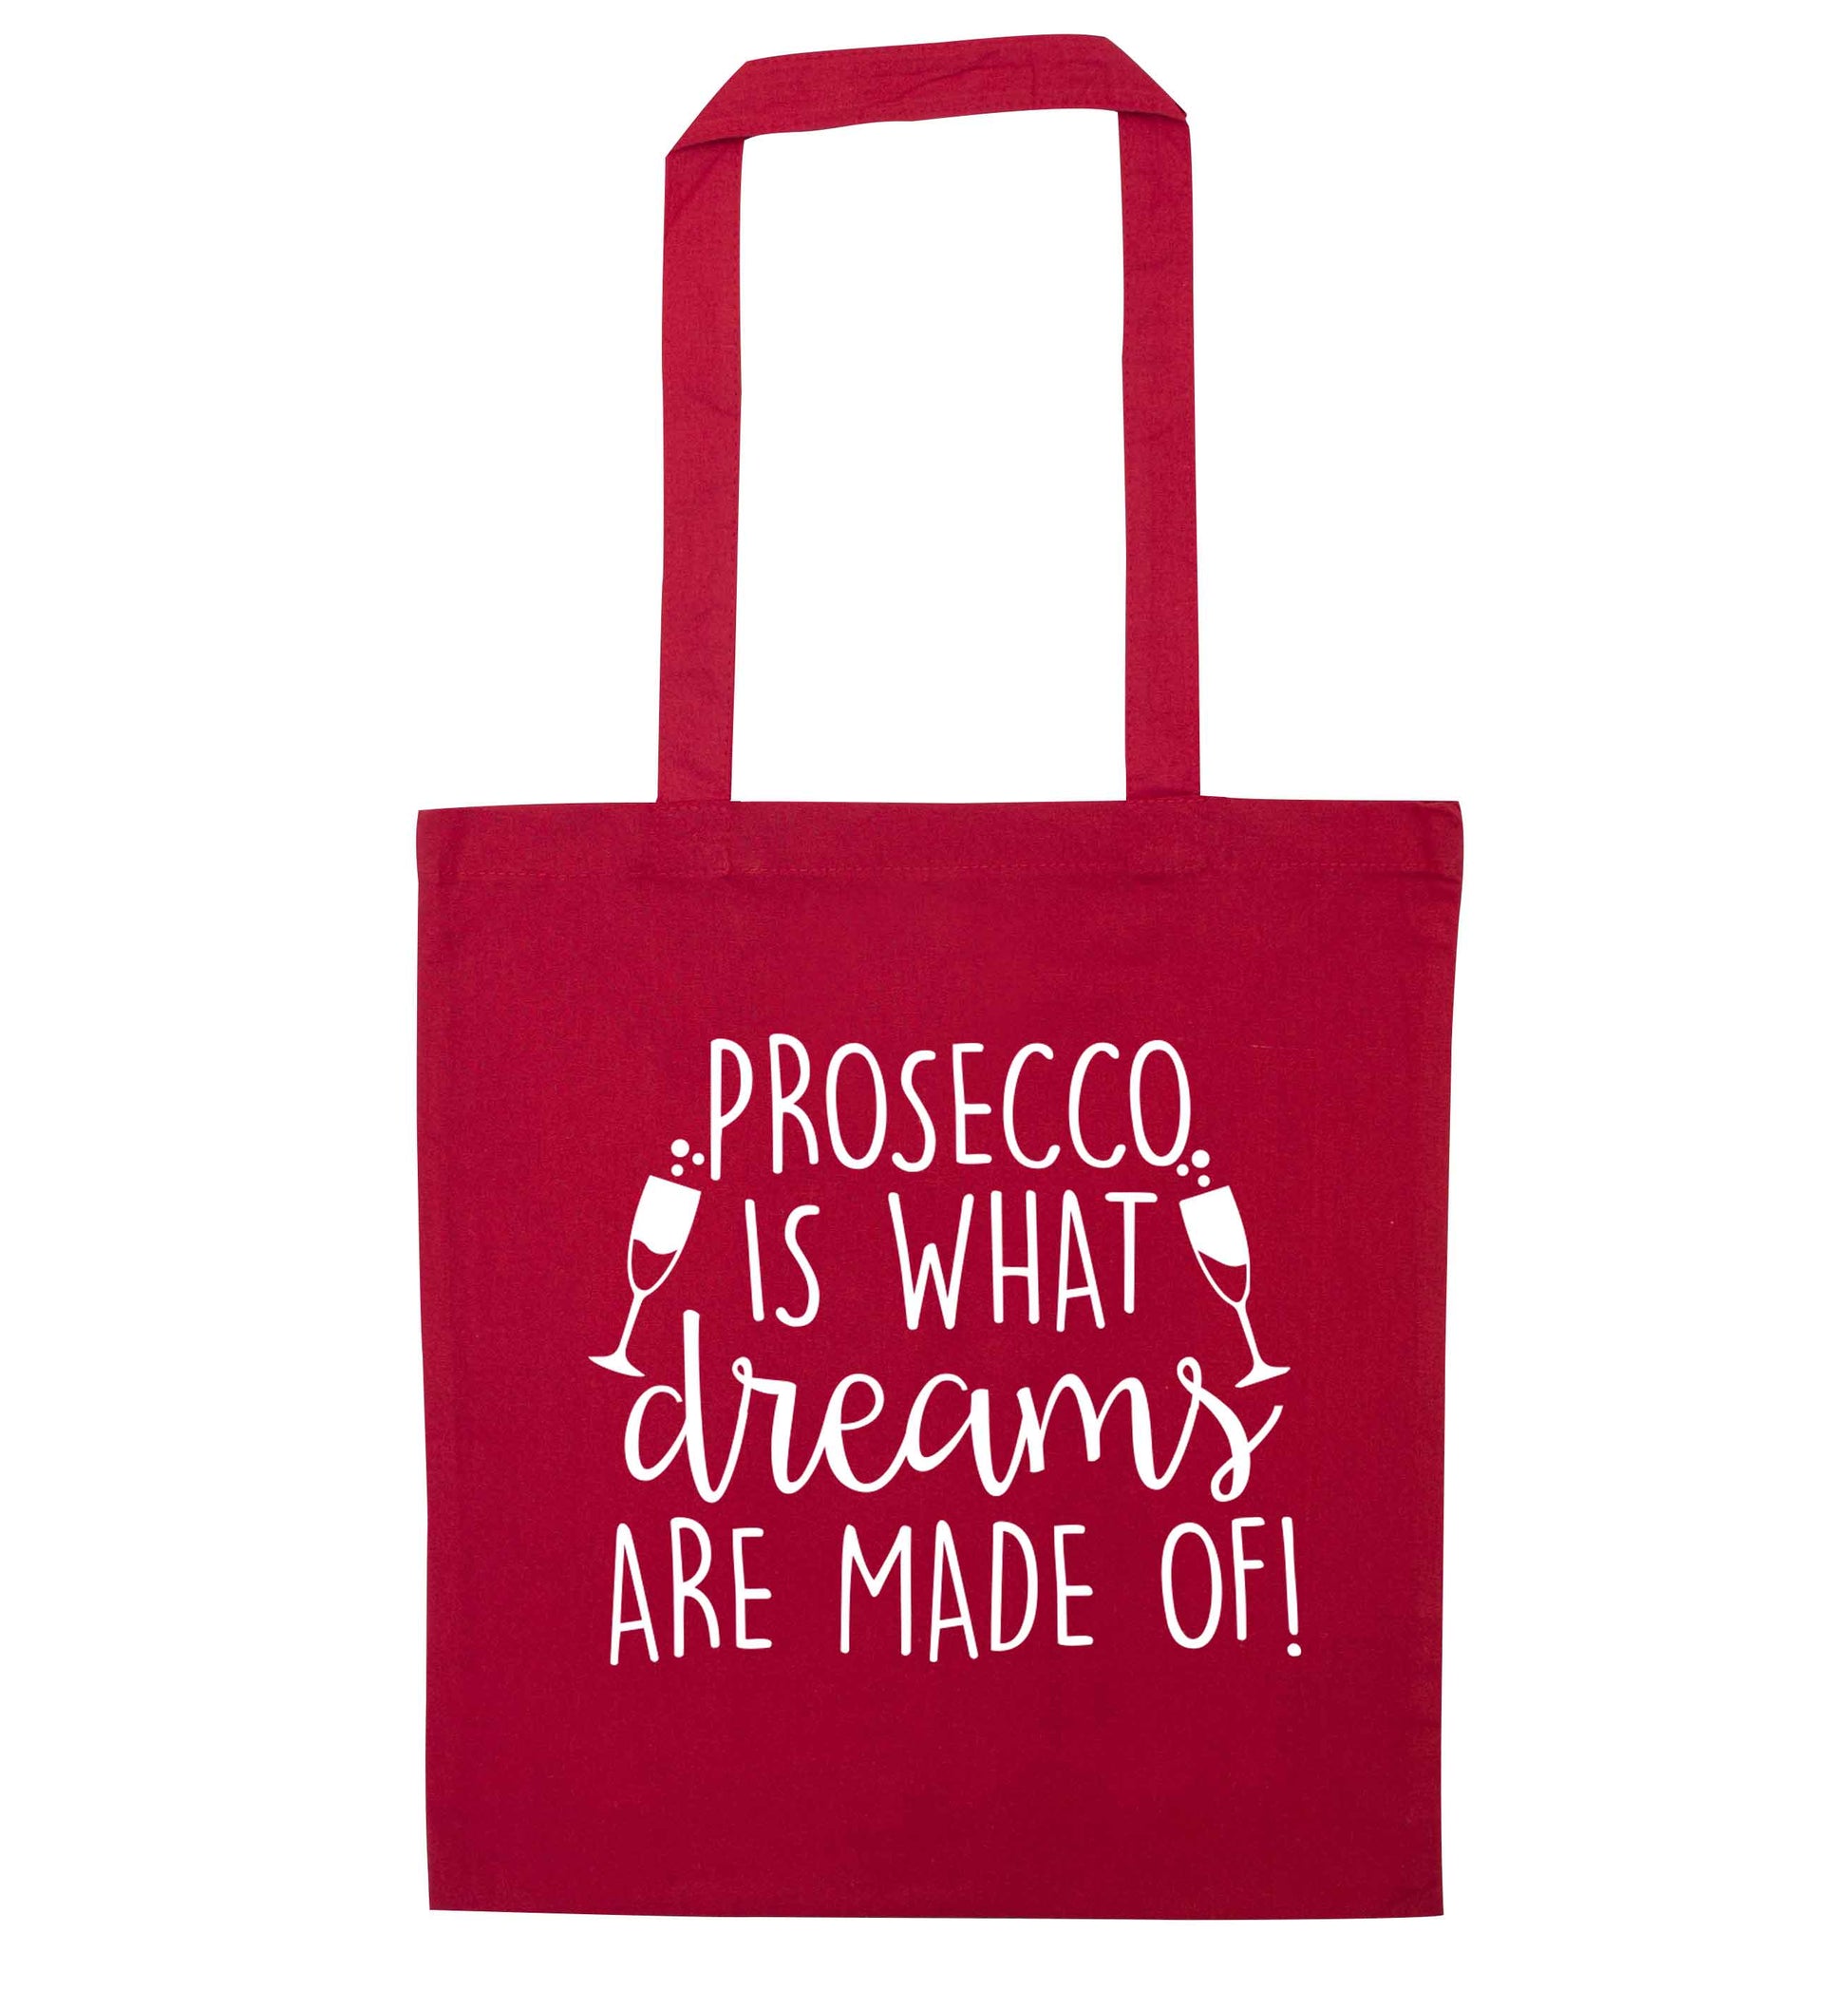 Prosecco is what dreams are made of red tote bag